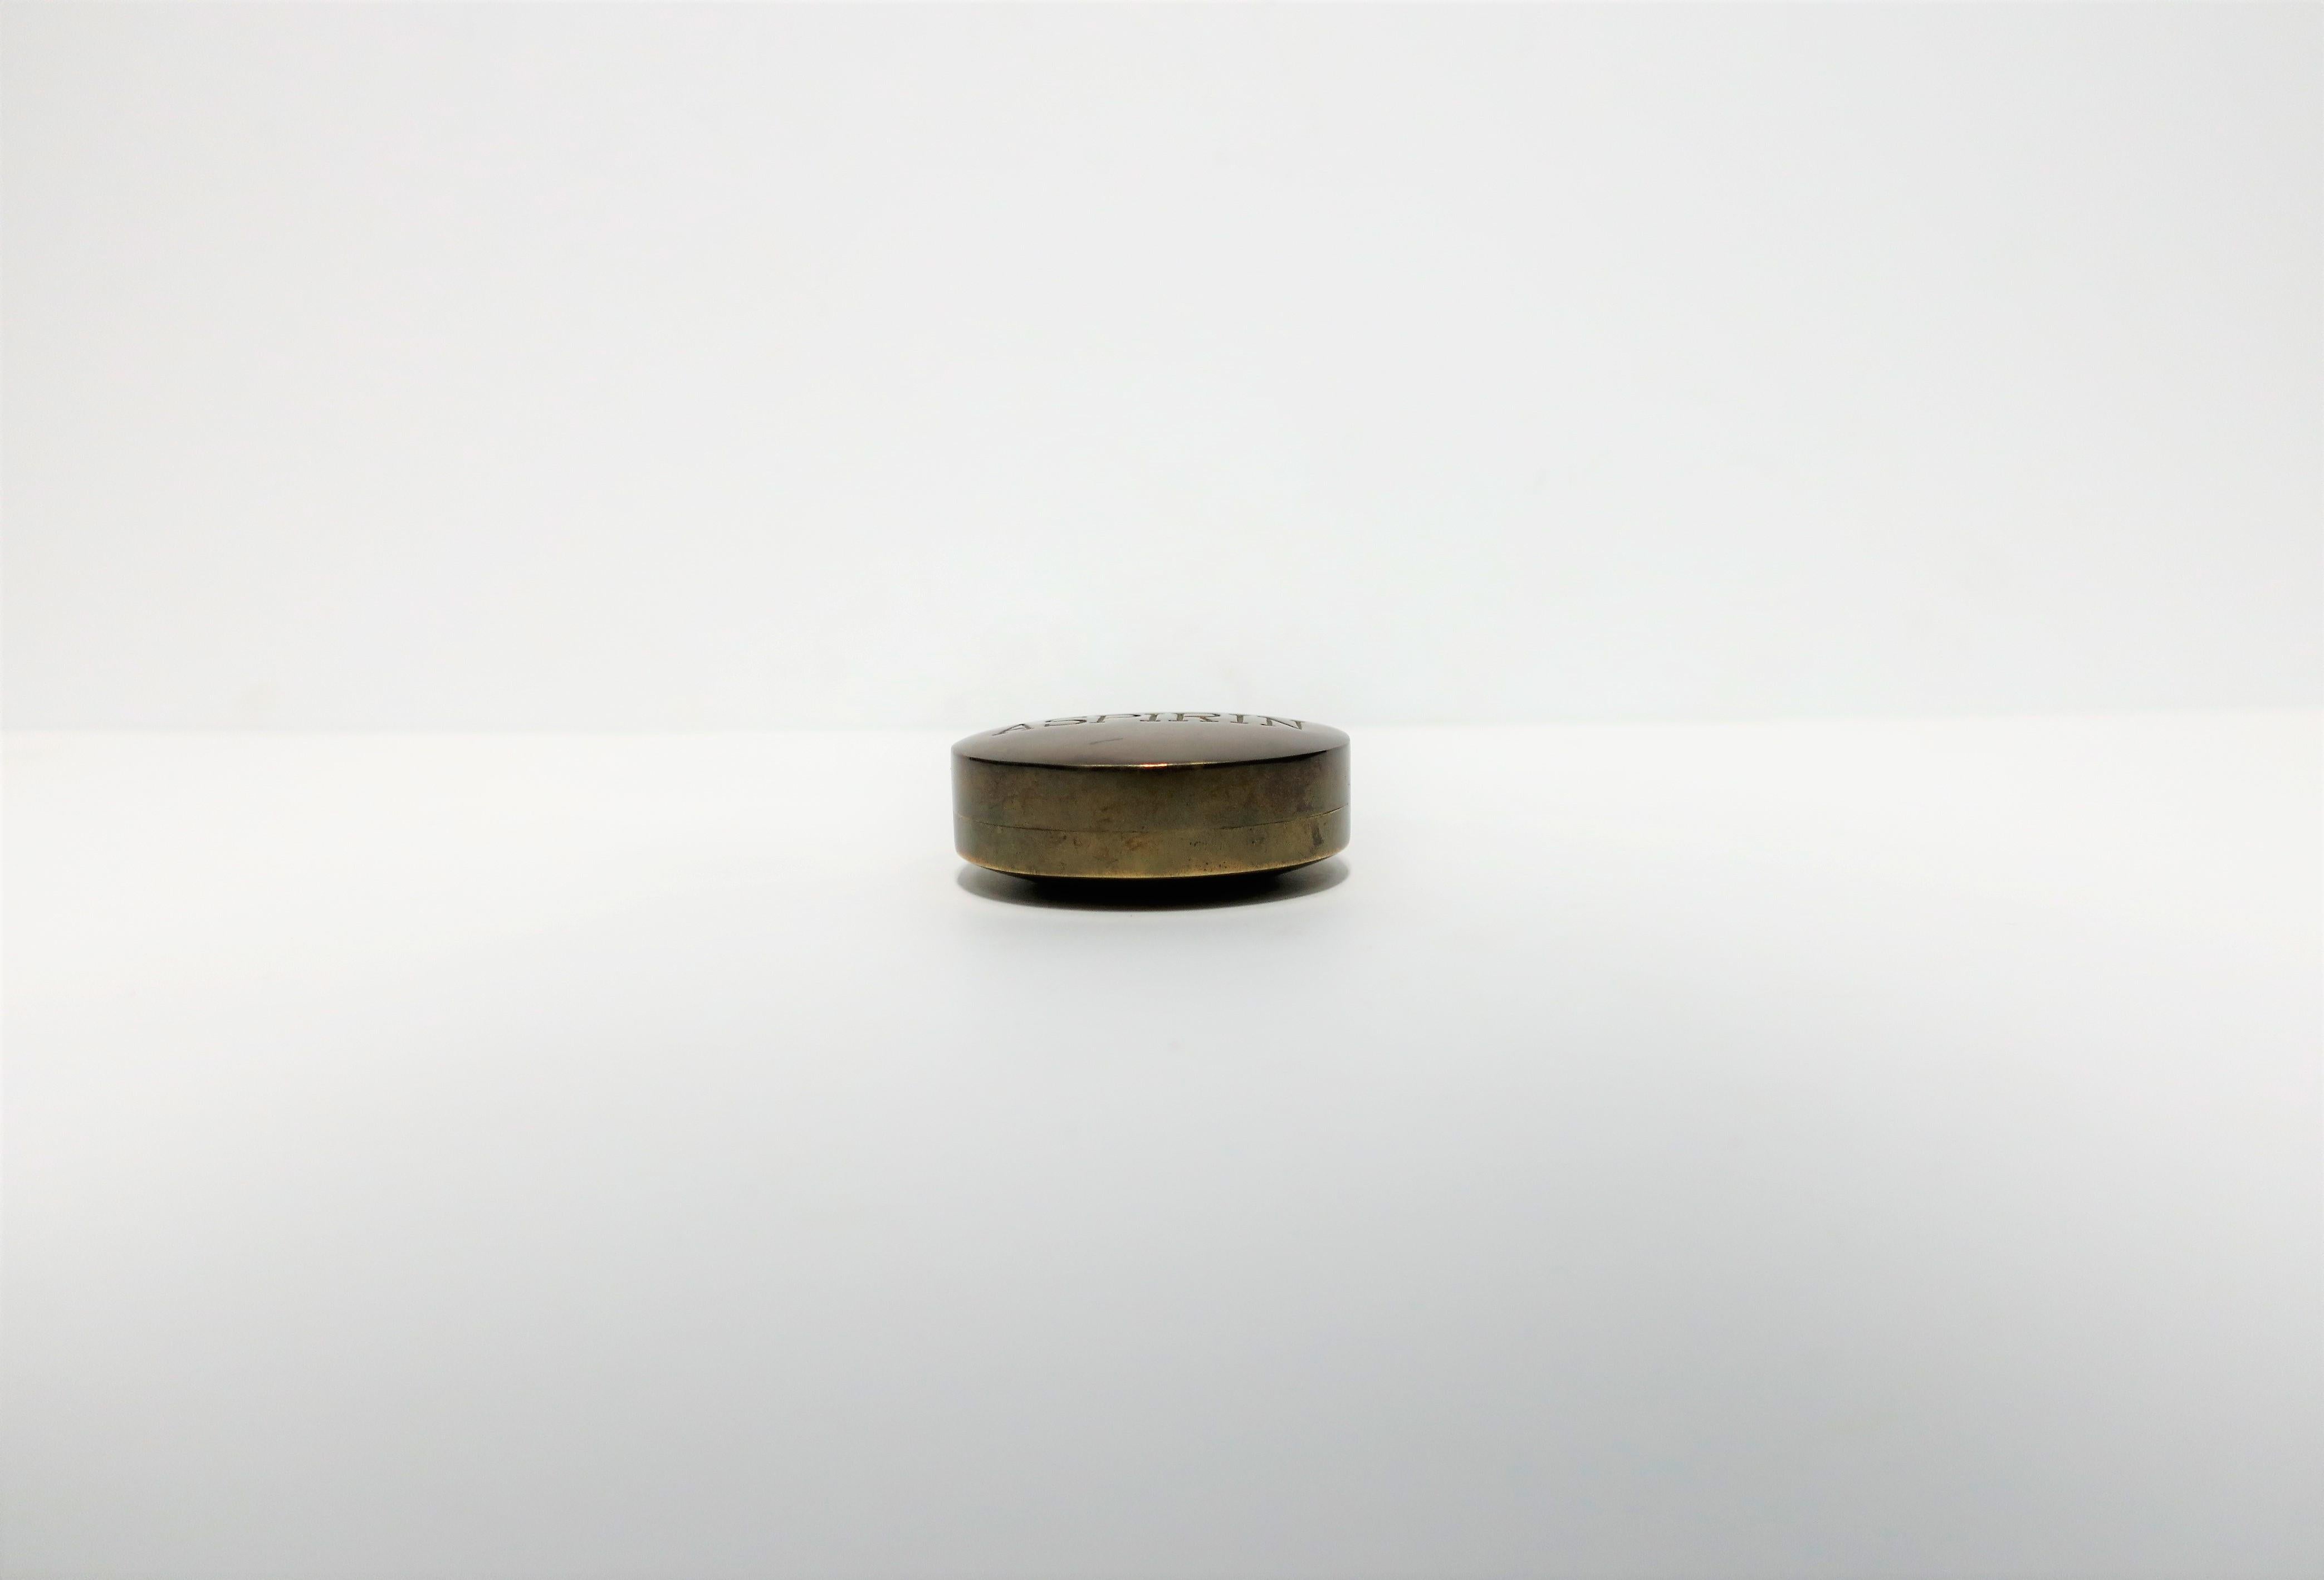 A substantial round Post-Modern 'ASPIRIN' brass box, 20th century, circa 1970s. Box is an oversized 'aspirin' in solid hand-cast brass and embossed on top in all caps is the word 'ASPIRIN'. A great piece representative of the Post-Modern period,